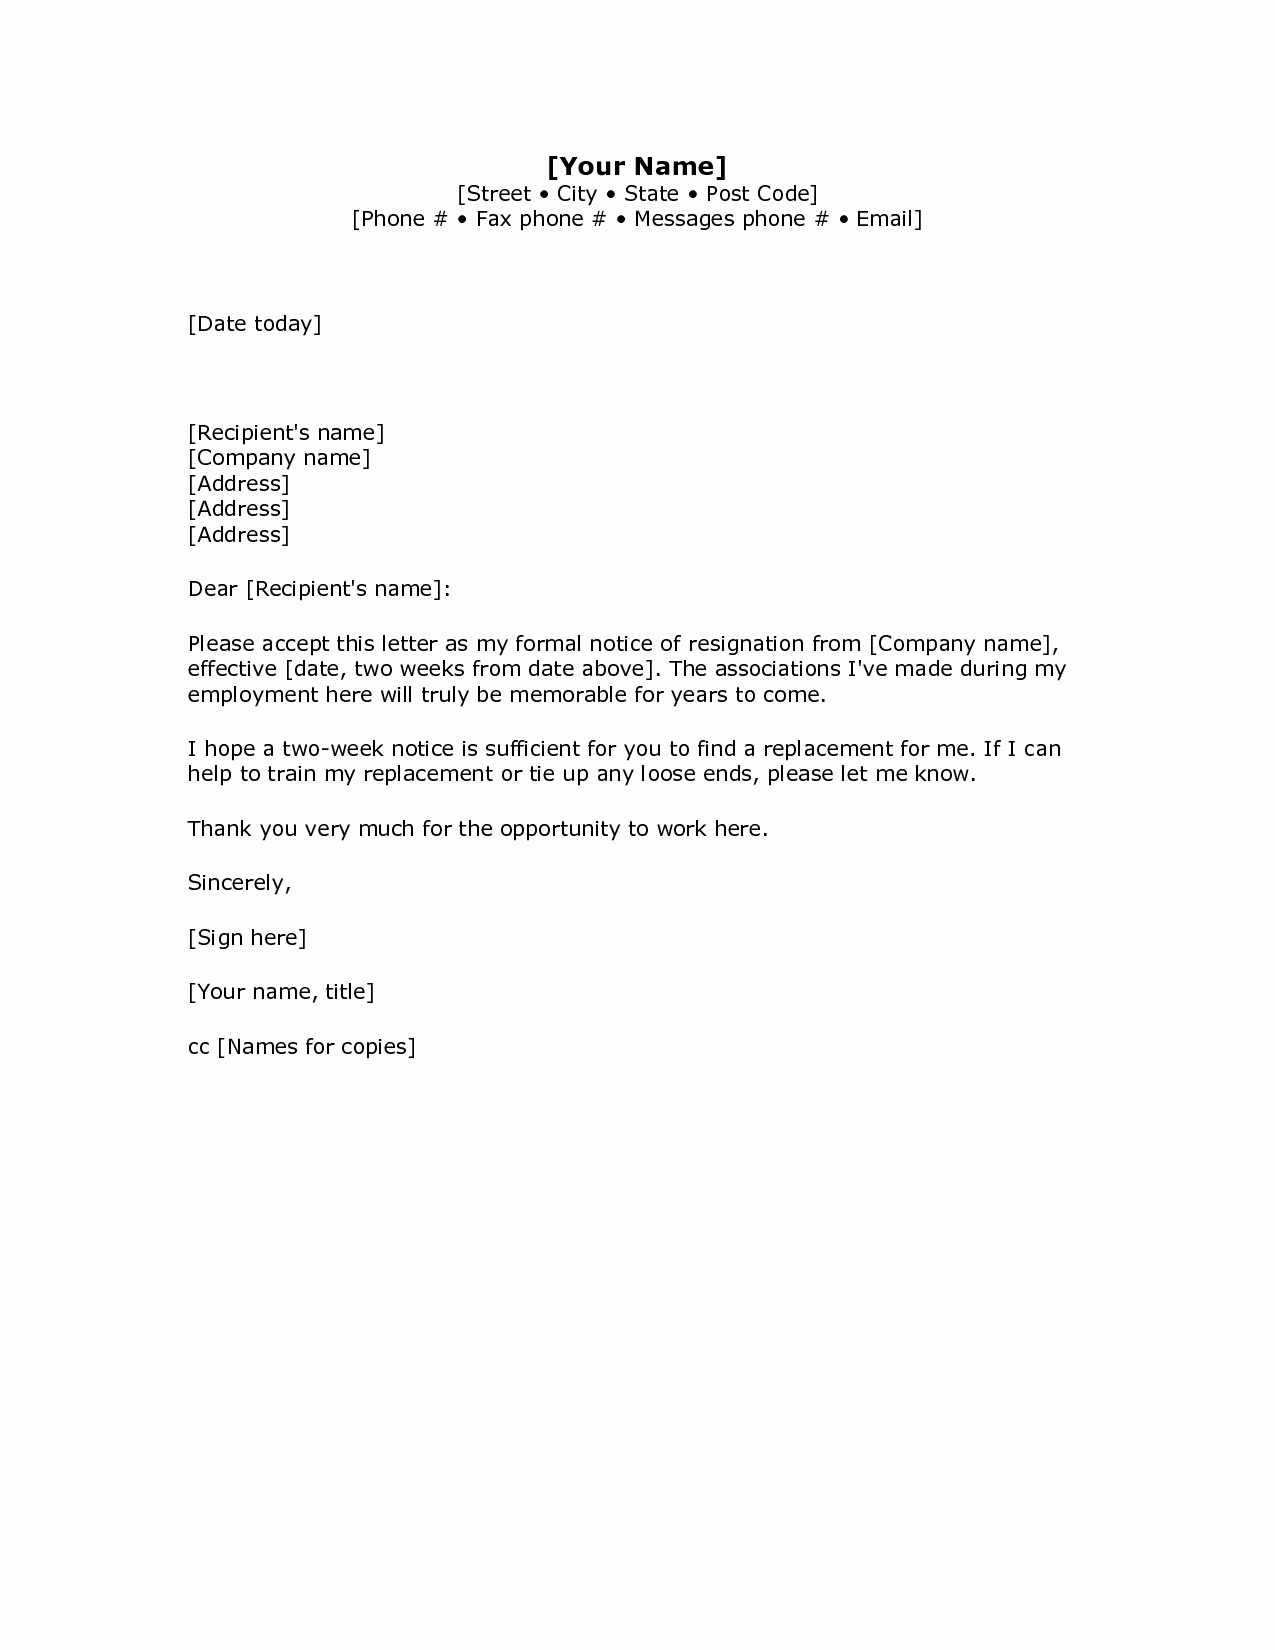 Two Weeks Notice Letter How to Write Guide &amp; Resignation